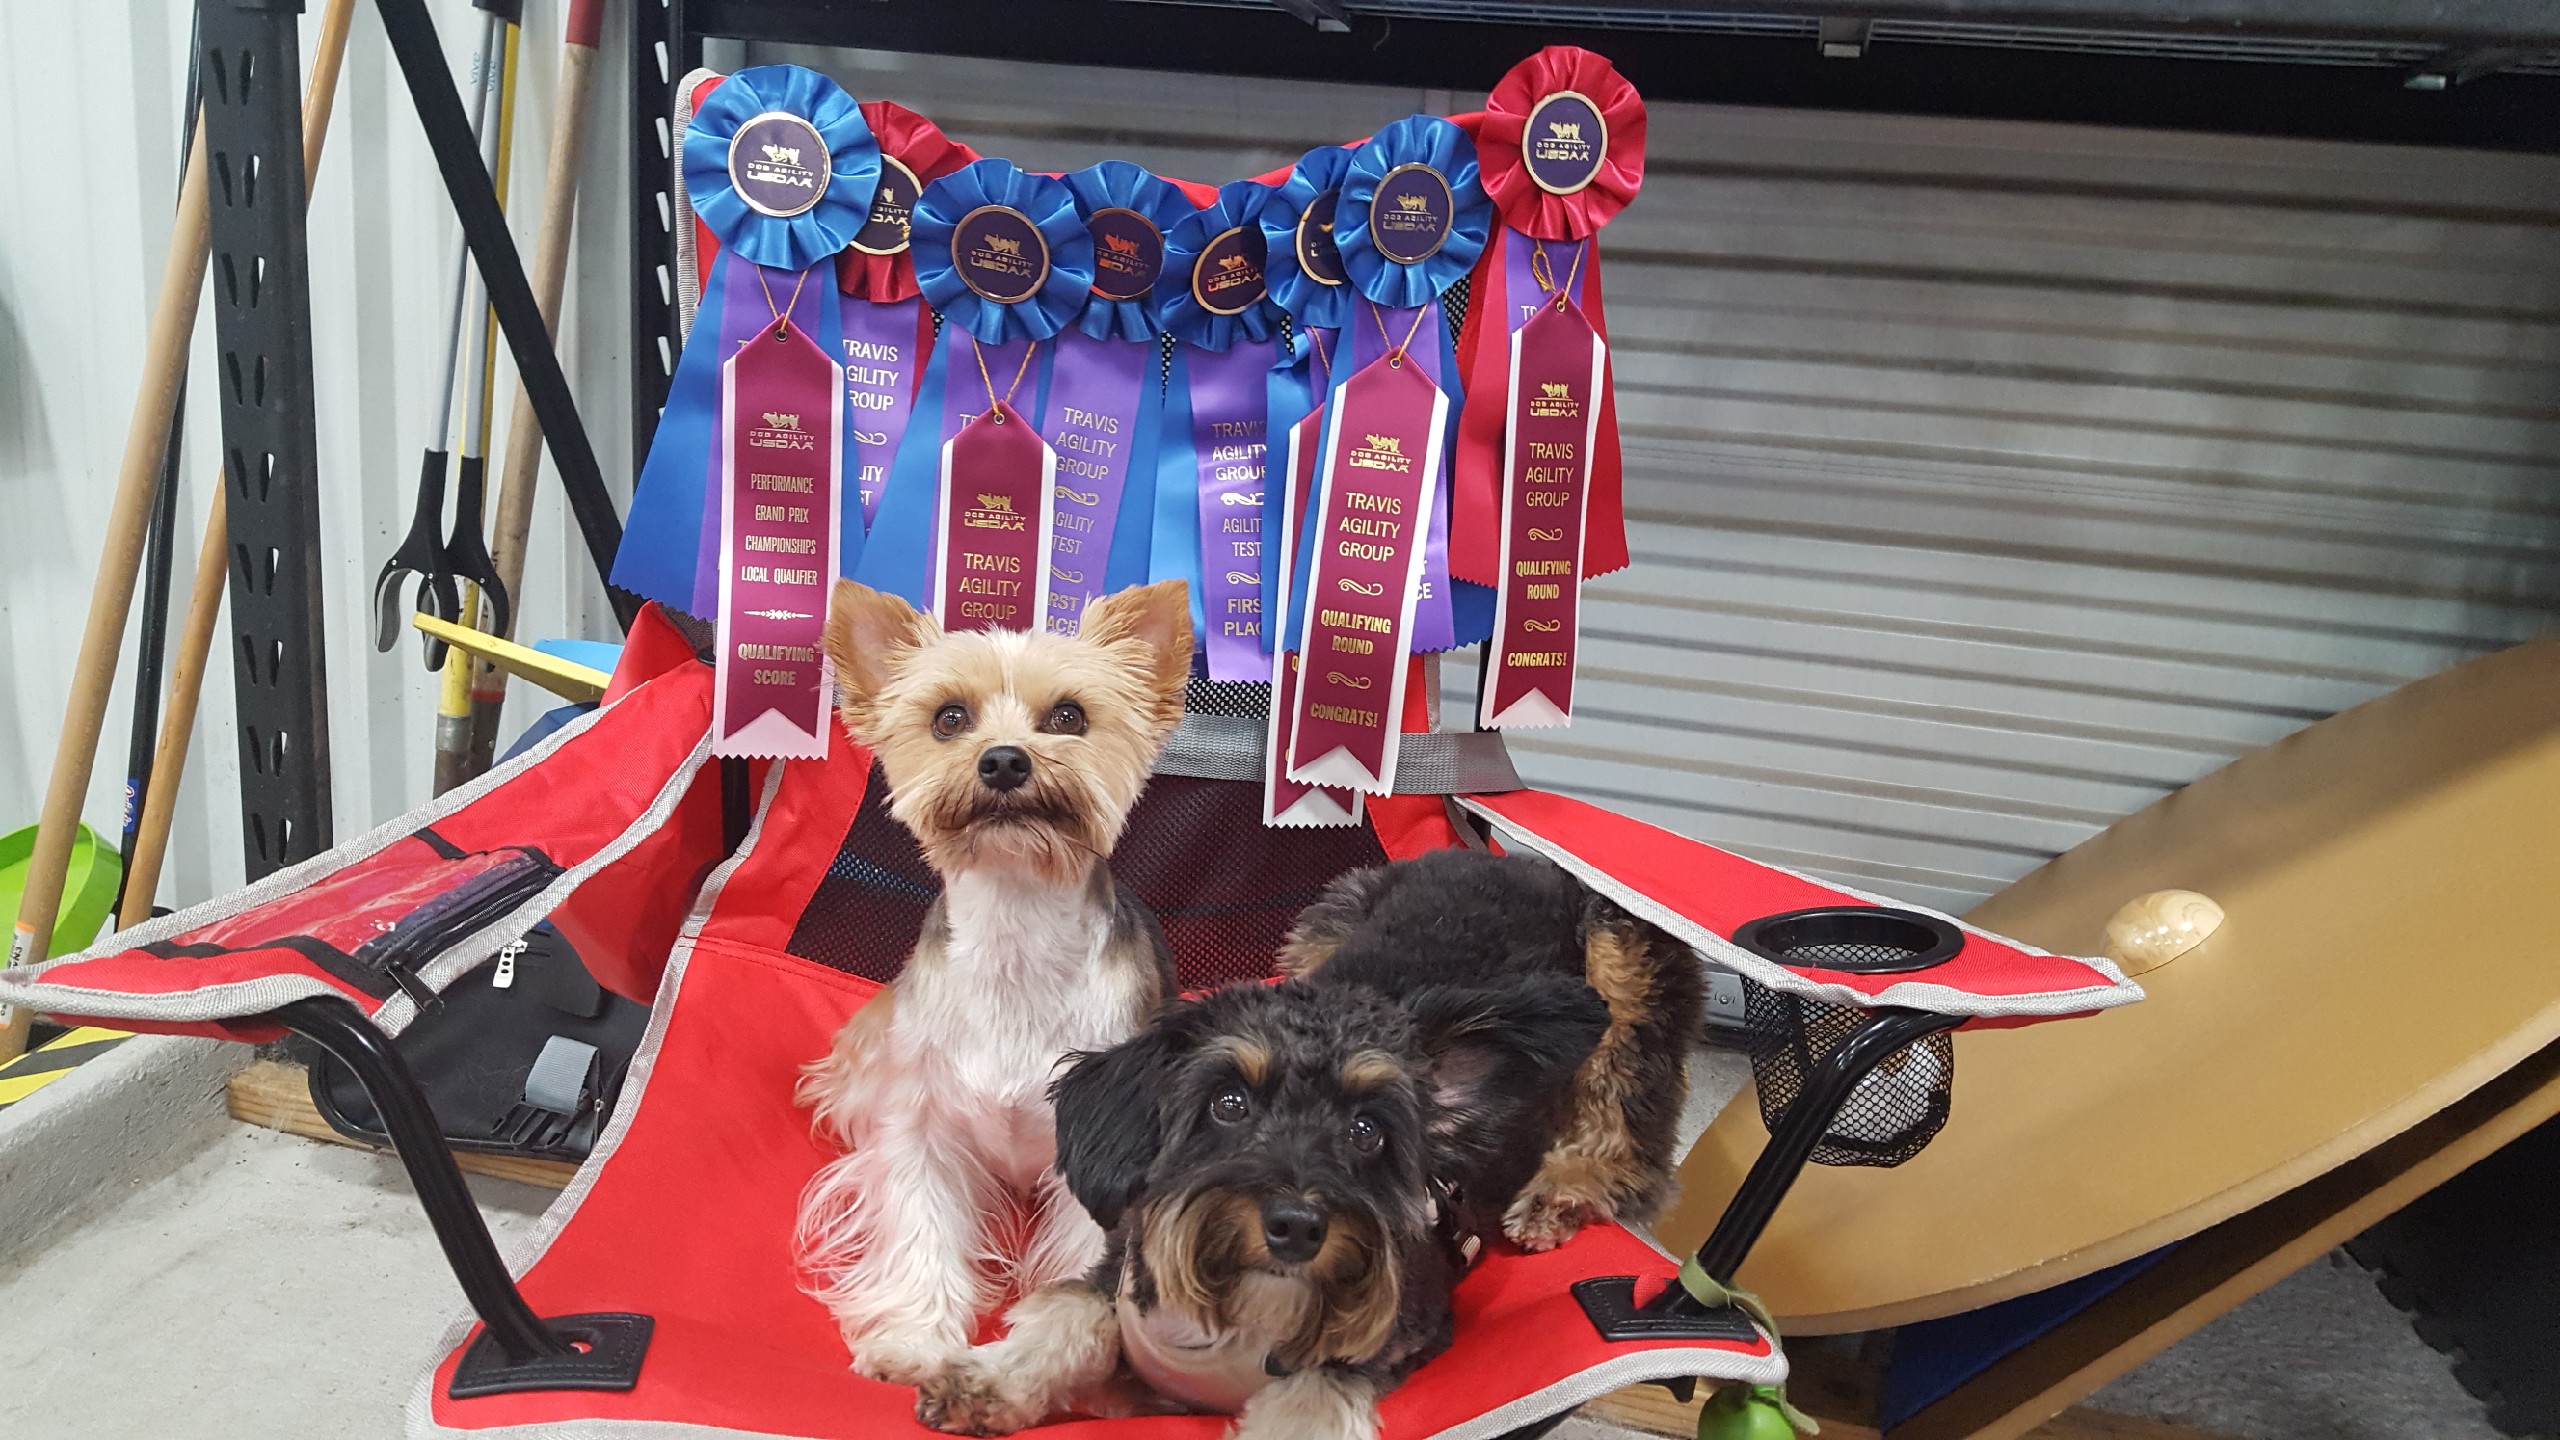 Rosie and Shadow showing off all of their ribbons